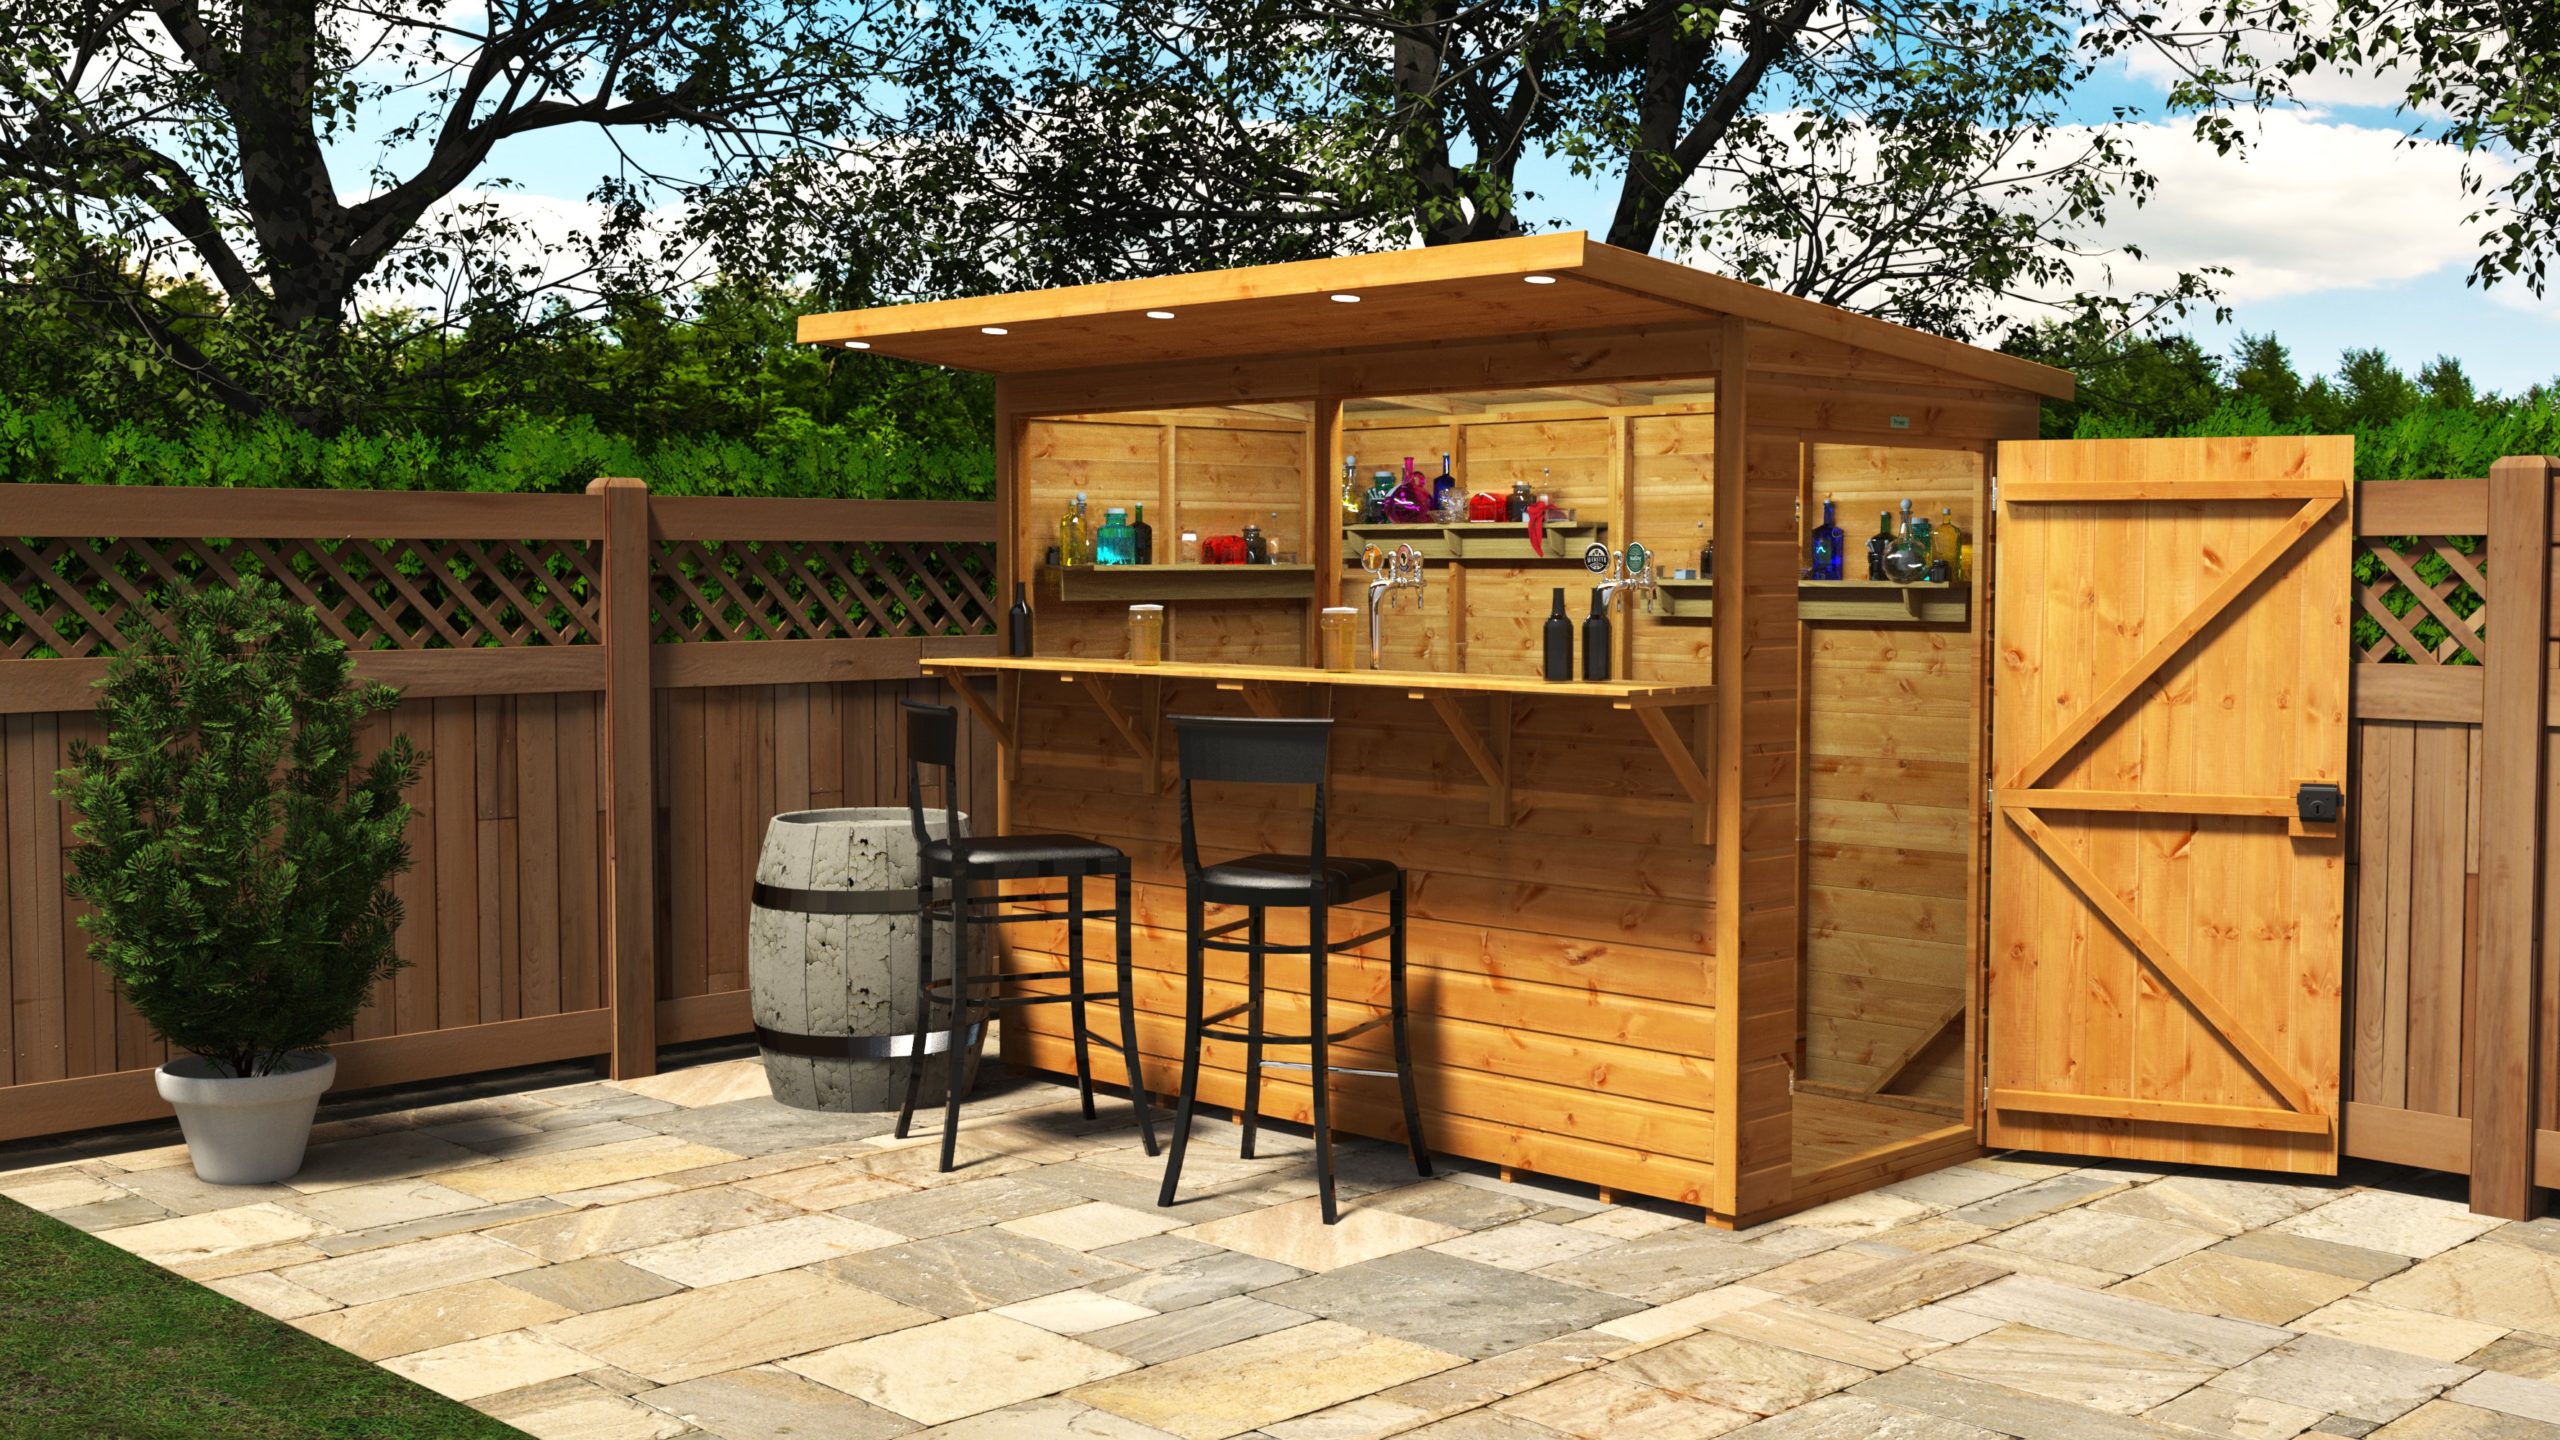 Featured image for “Power® | PUB Shed Garden Bar”